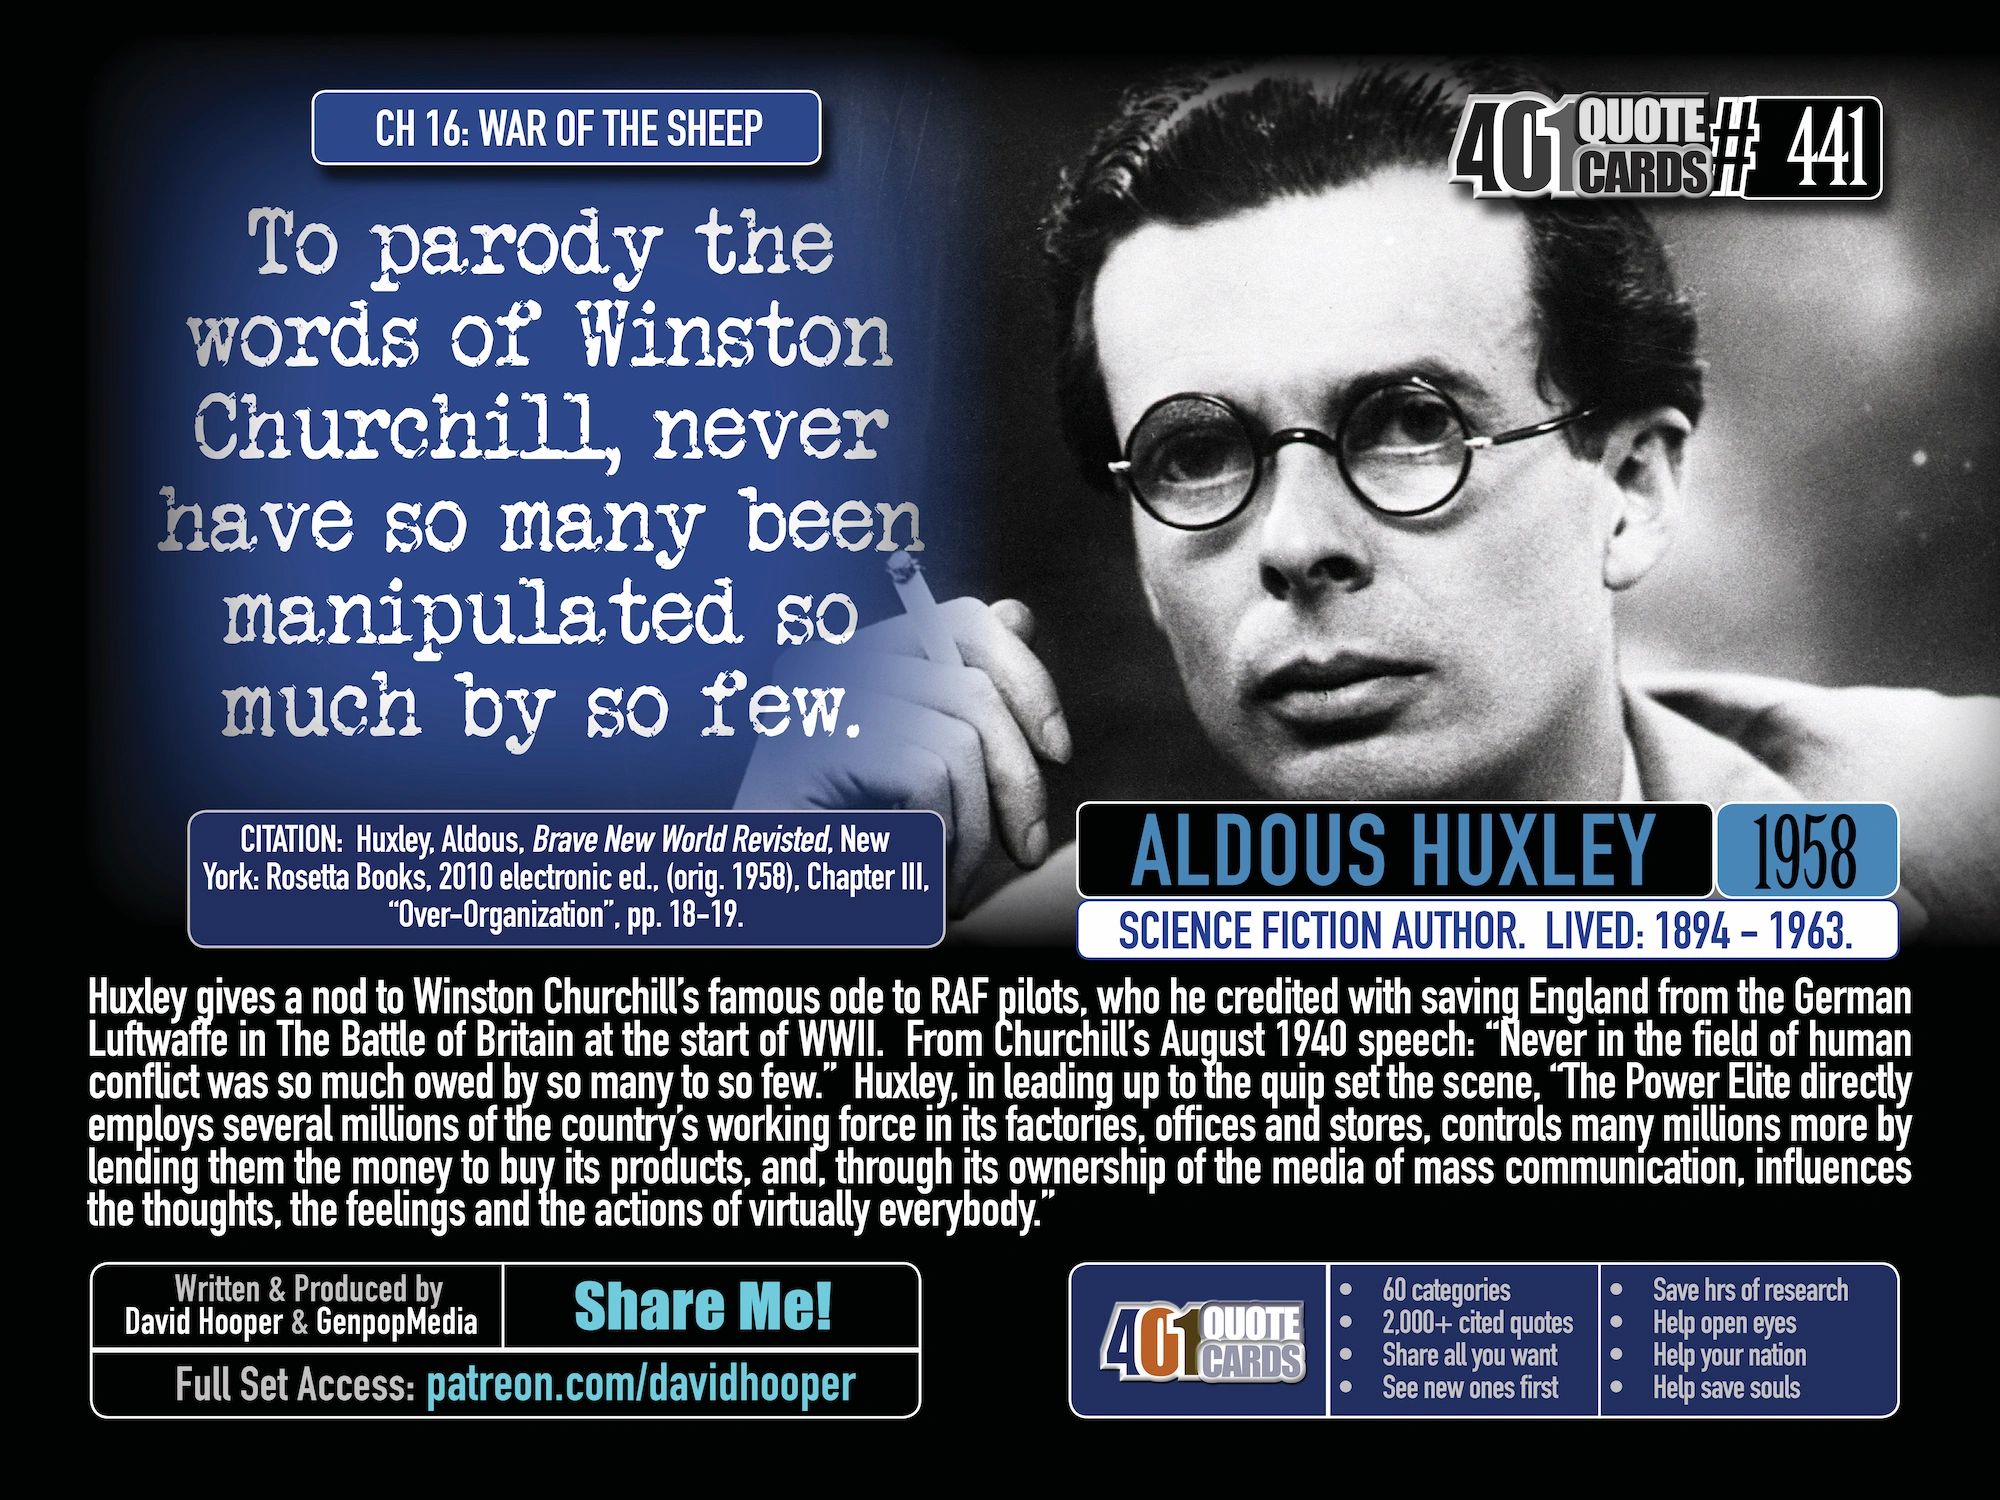 Aldous Huxley quote on manipulation: "To parody the words of Winston Churchill..." (401quotes.com)